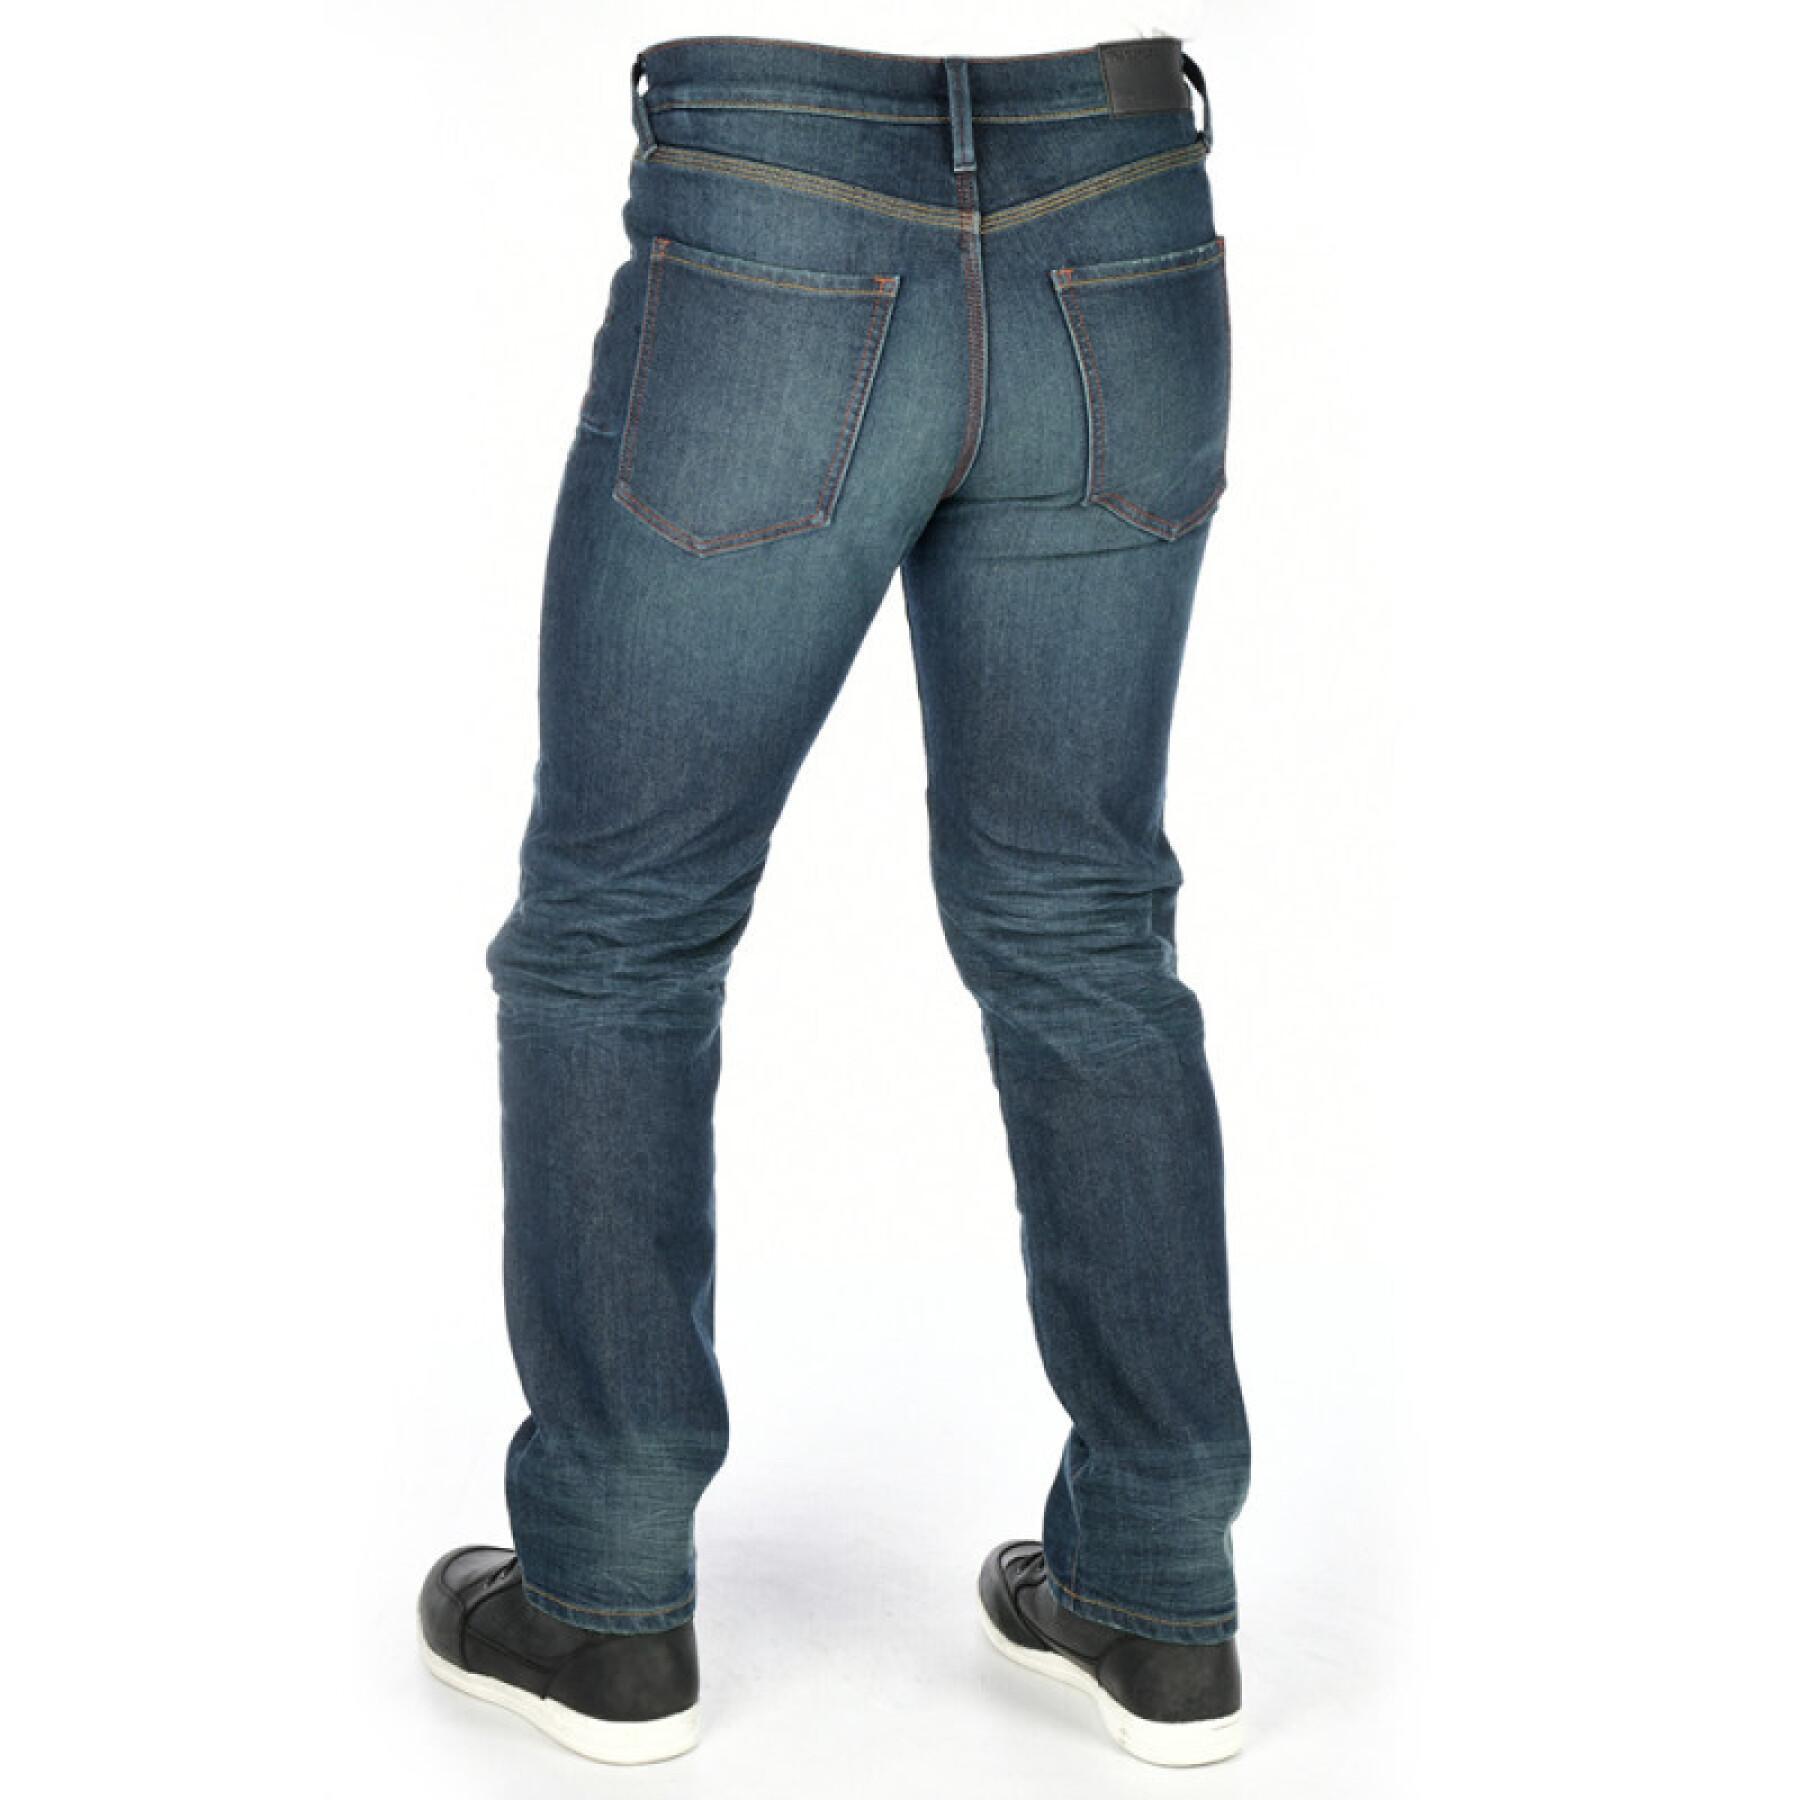 Straight moto jeans Oxford Original Approved AA Dynamic S